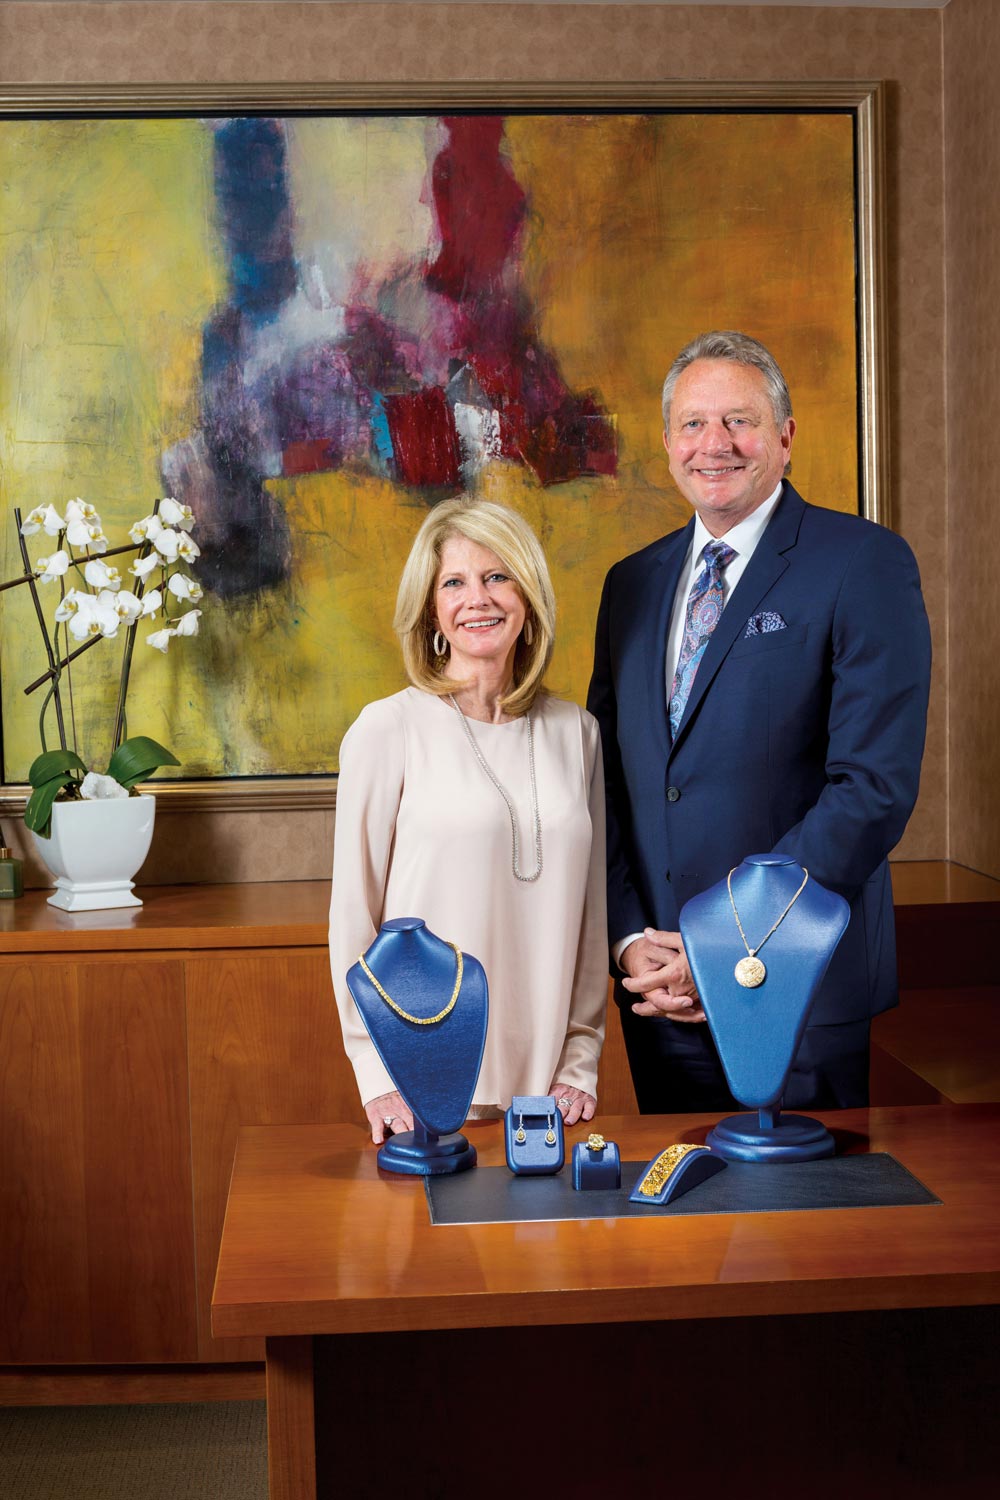 Leeds & Son Fine Jewelers CEO, Terry Weiner and Riki Stein, Vice President